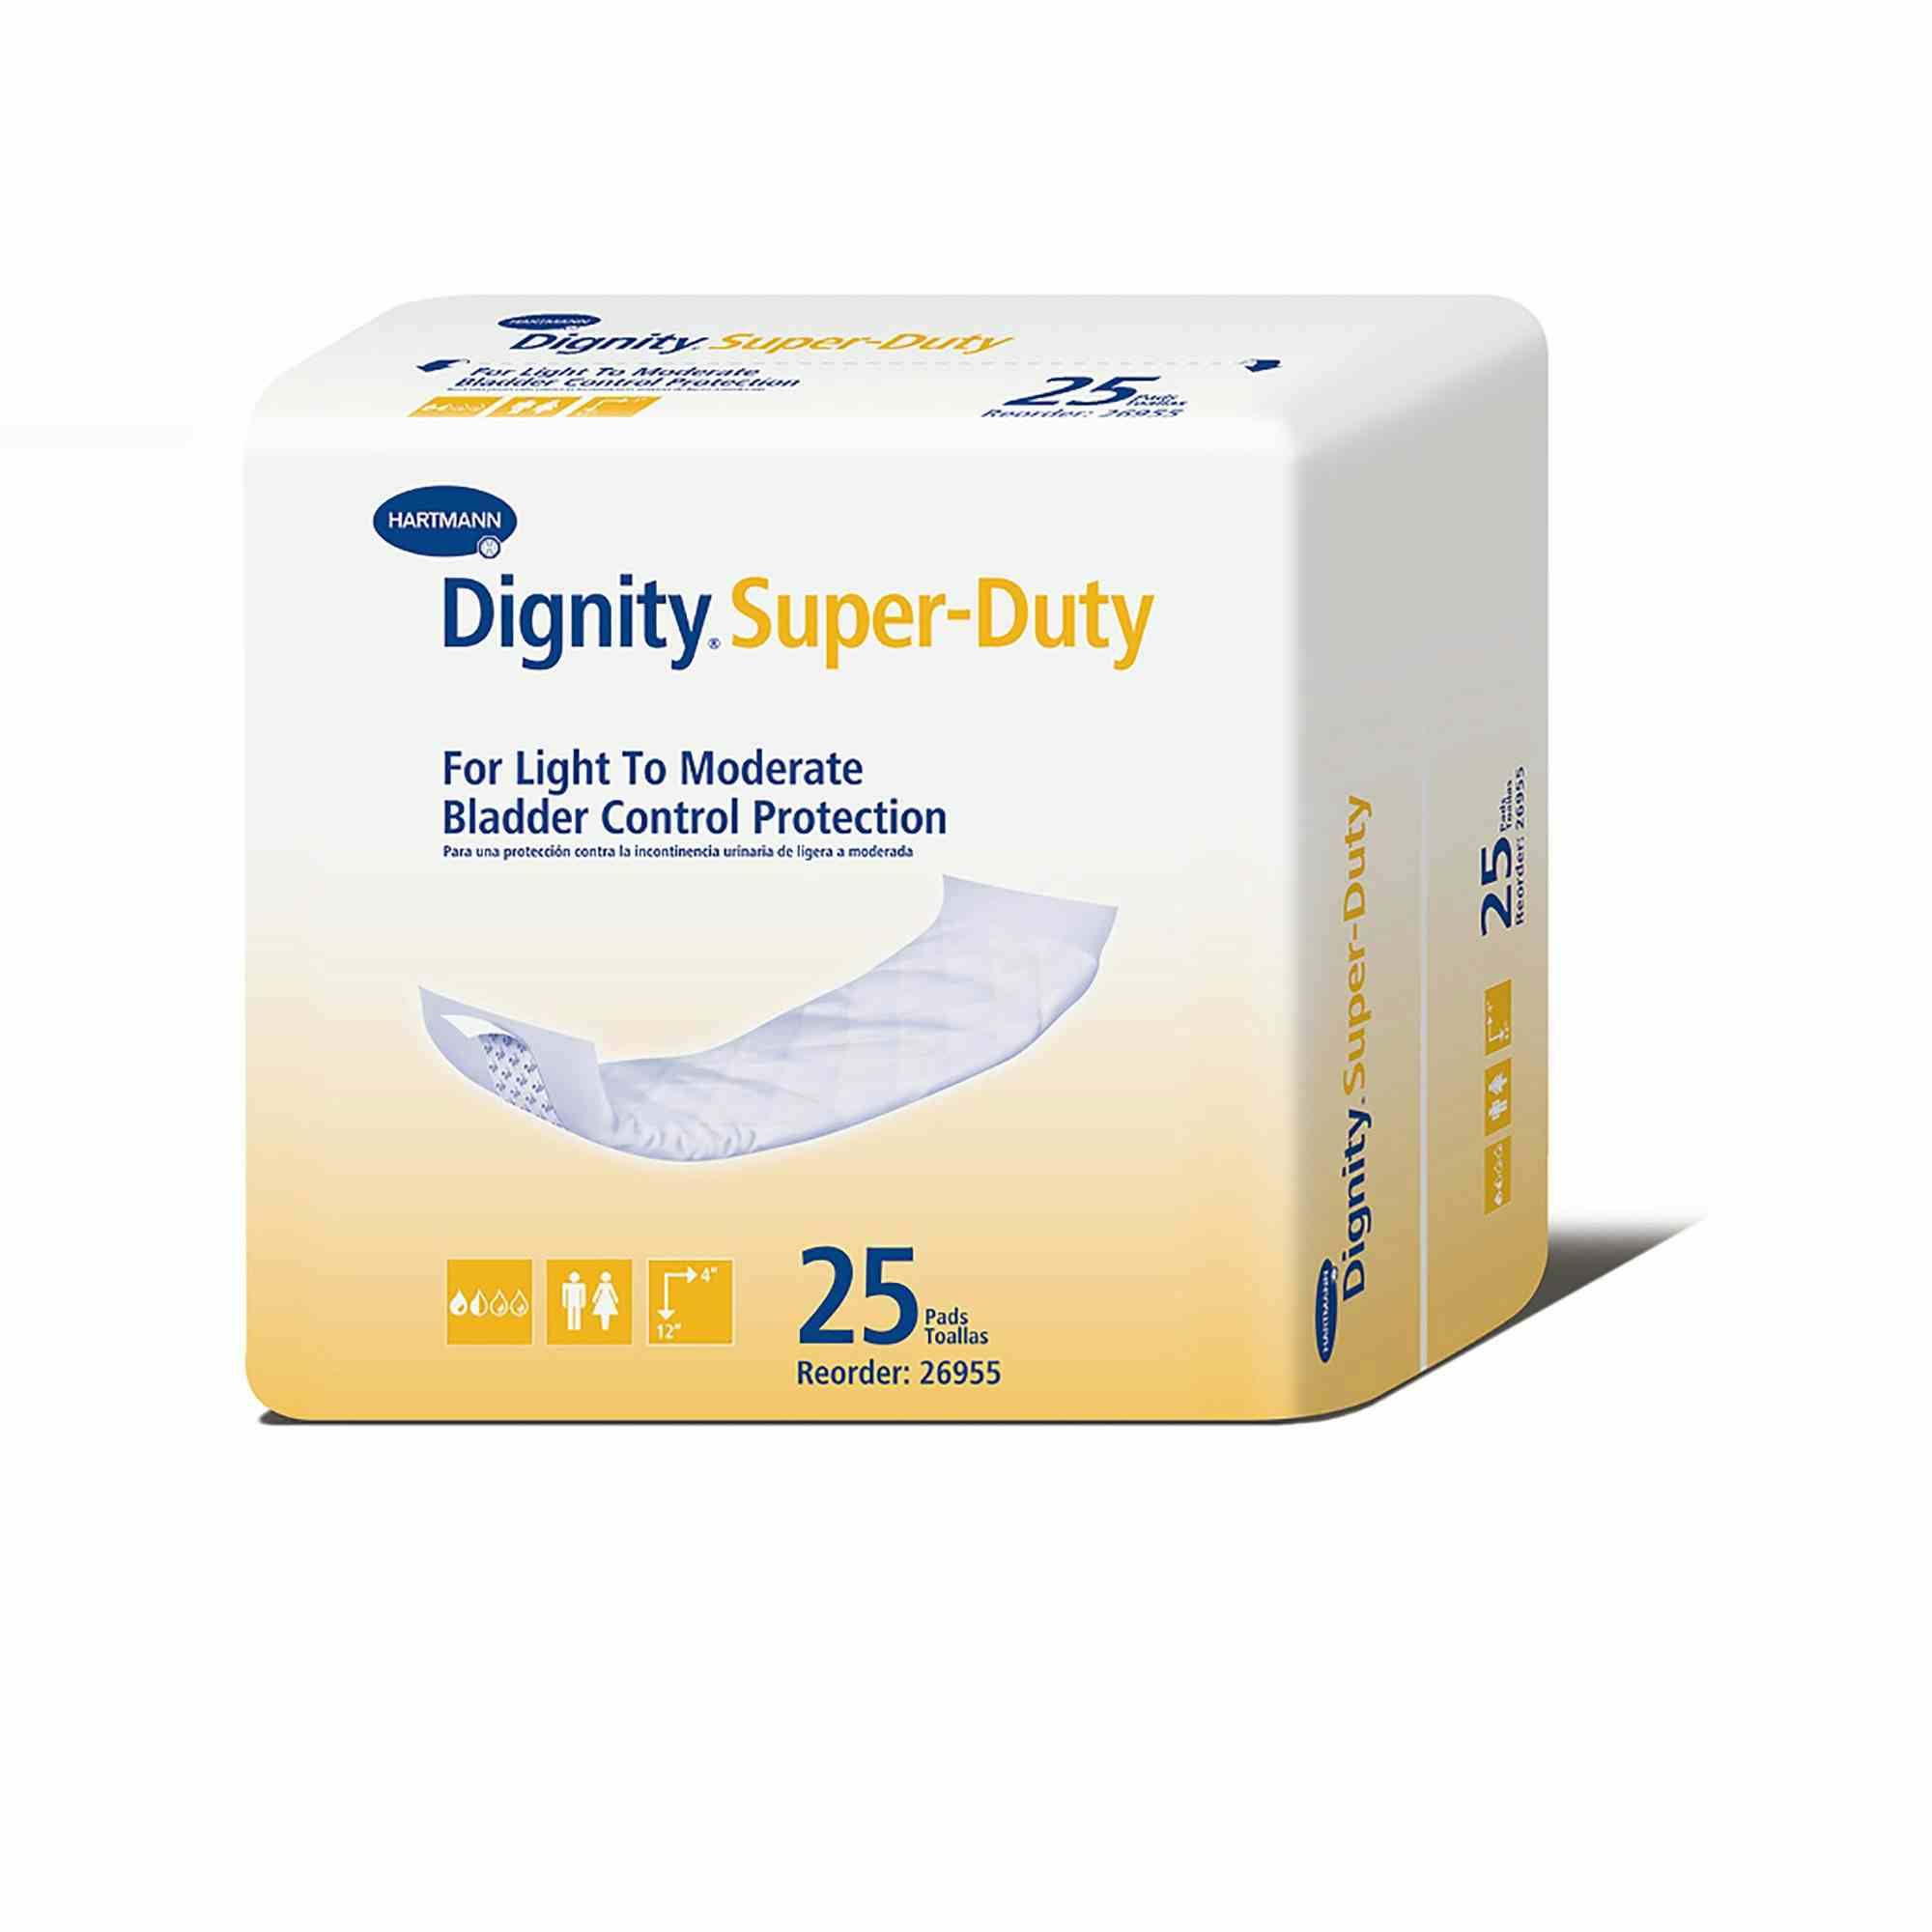 Dignity Adult Unisex Disposable Incontinence Liner, Moderate Absorbency , 26955, One Size Fits Most - Case of 200 Liners (8 Bags)